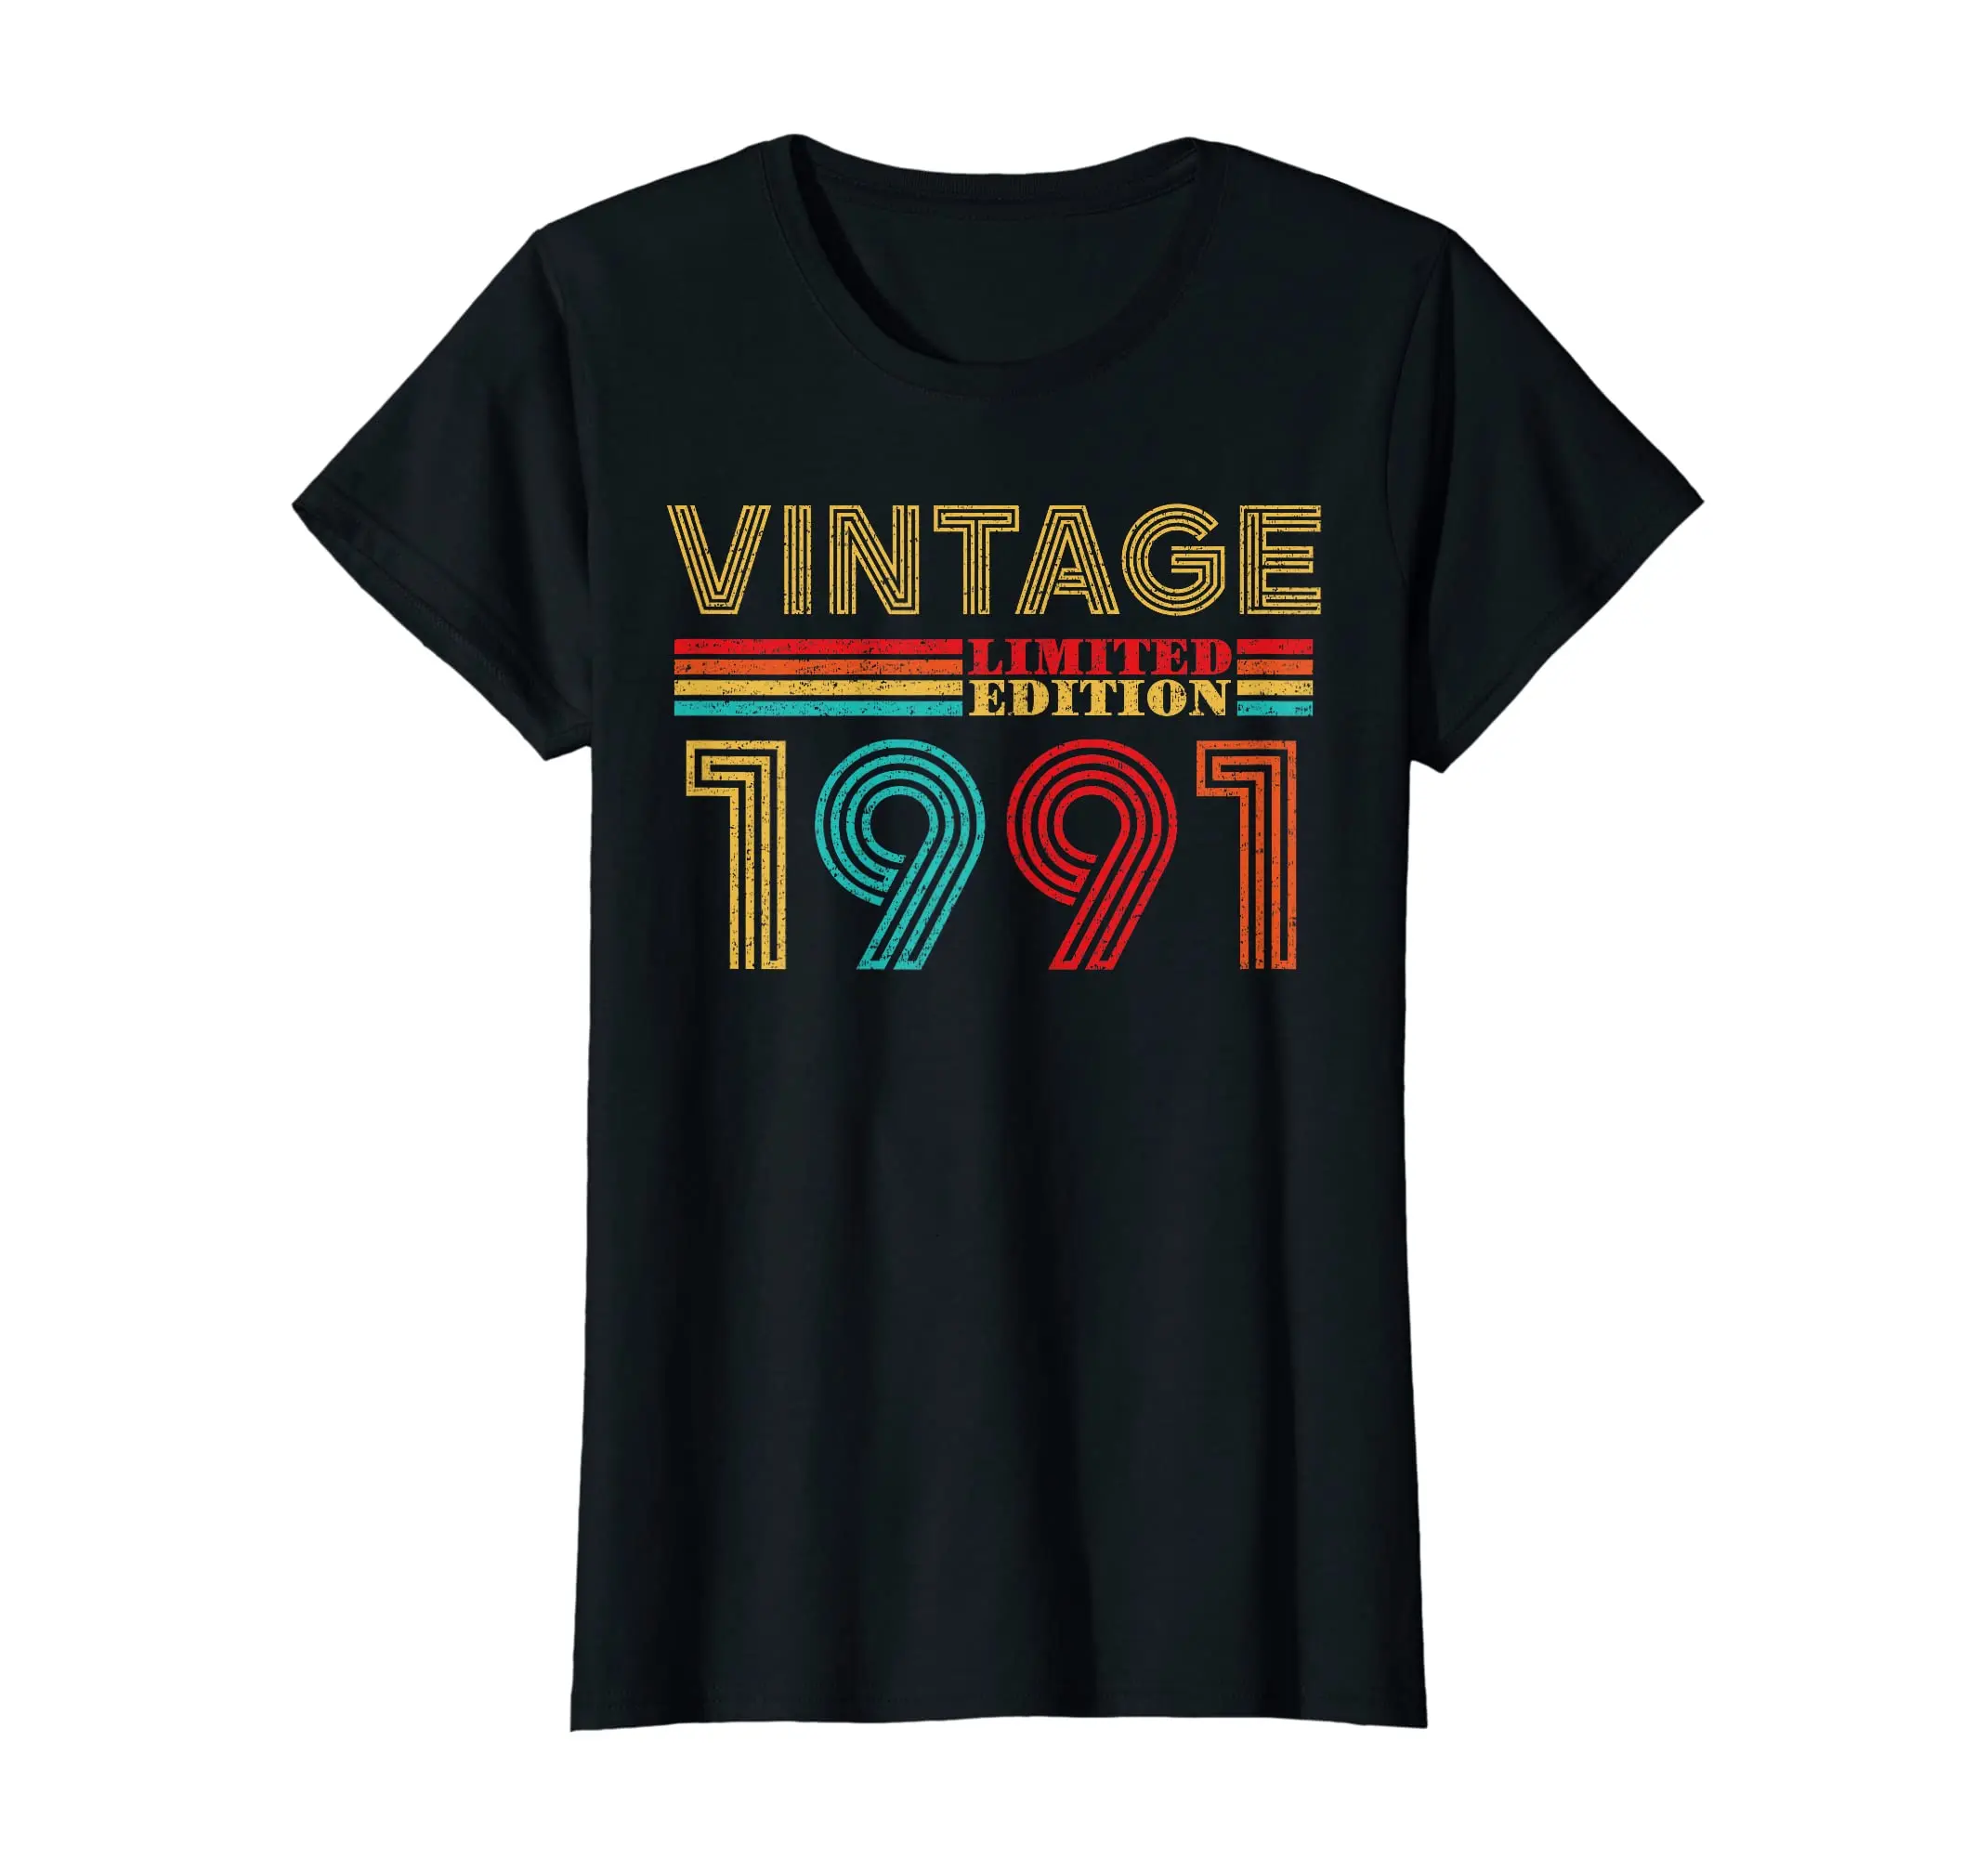 100% Cotton Women Lady Girl 32 Years Old Vintage 1991 Limited Edition 32th Birthday T-Shirt